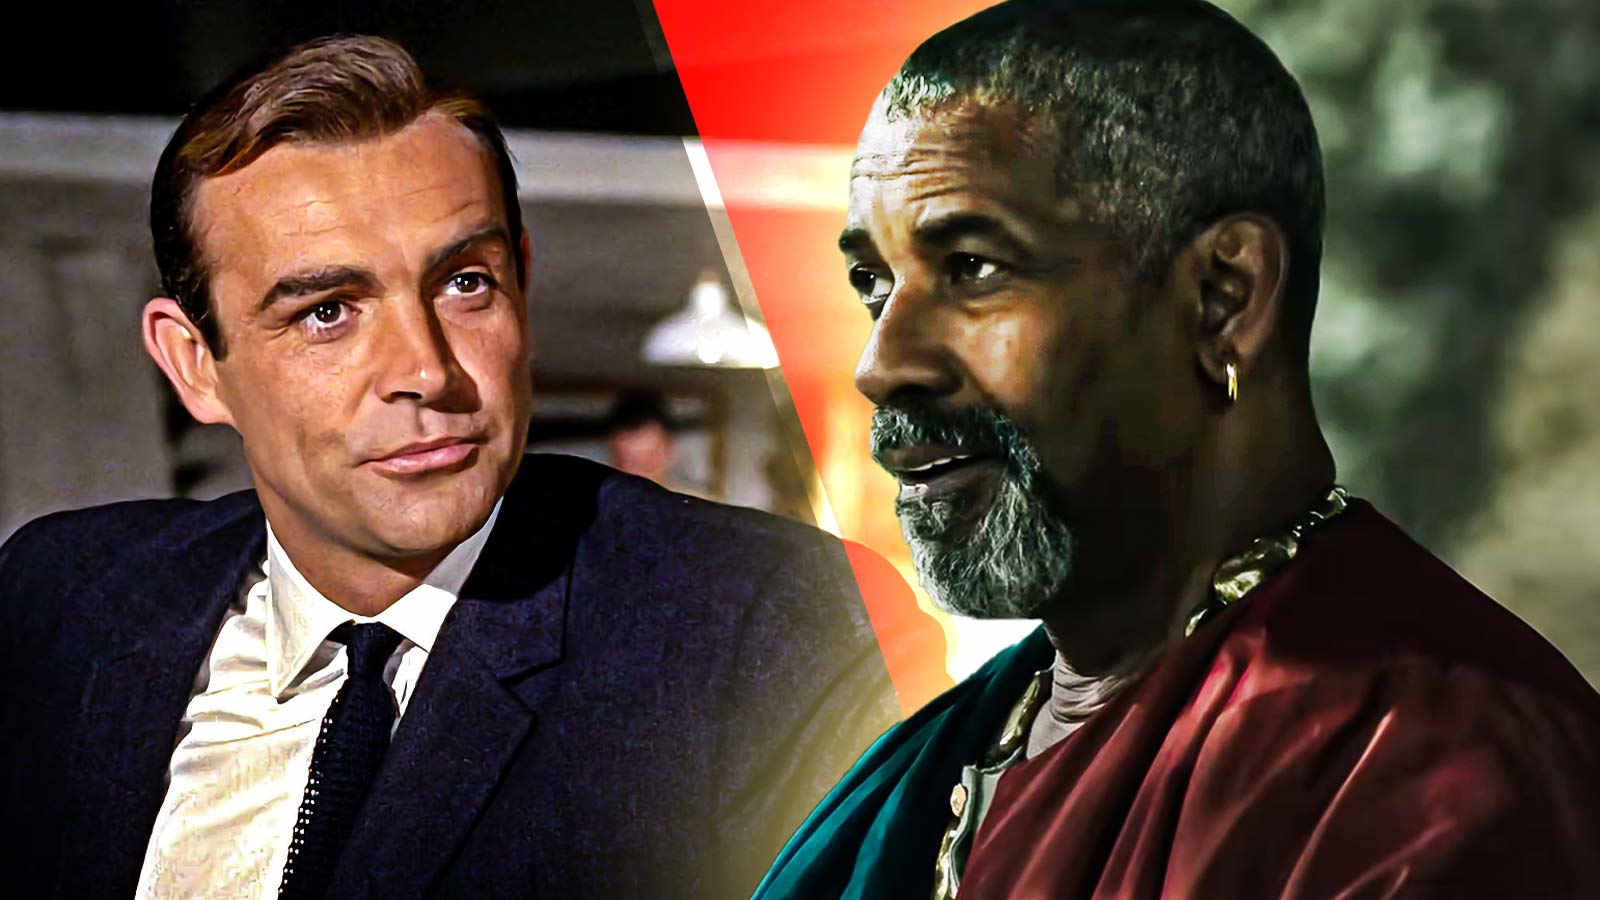 Denzel Washington’s Accent in ‘Gladiator 2’ Starts an Absurd Debate, Gets Him Compared to Sean Connery’s James Bond for Good Reason